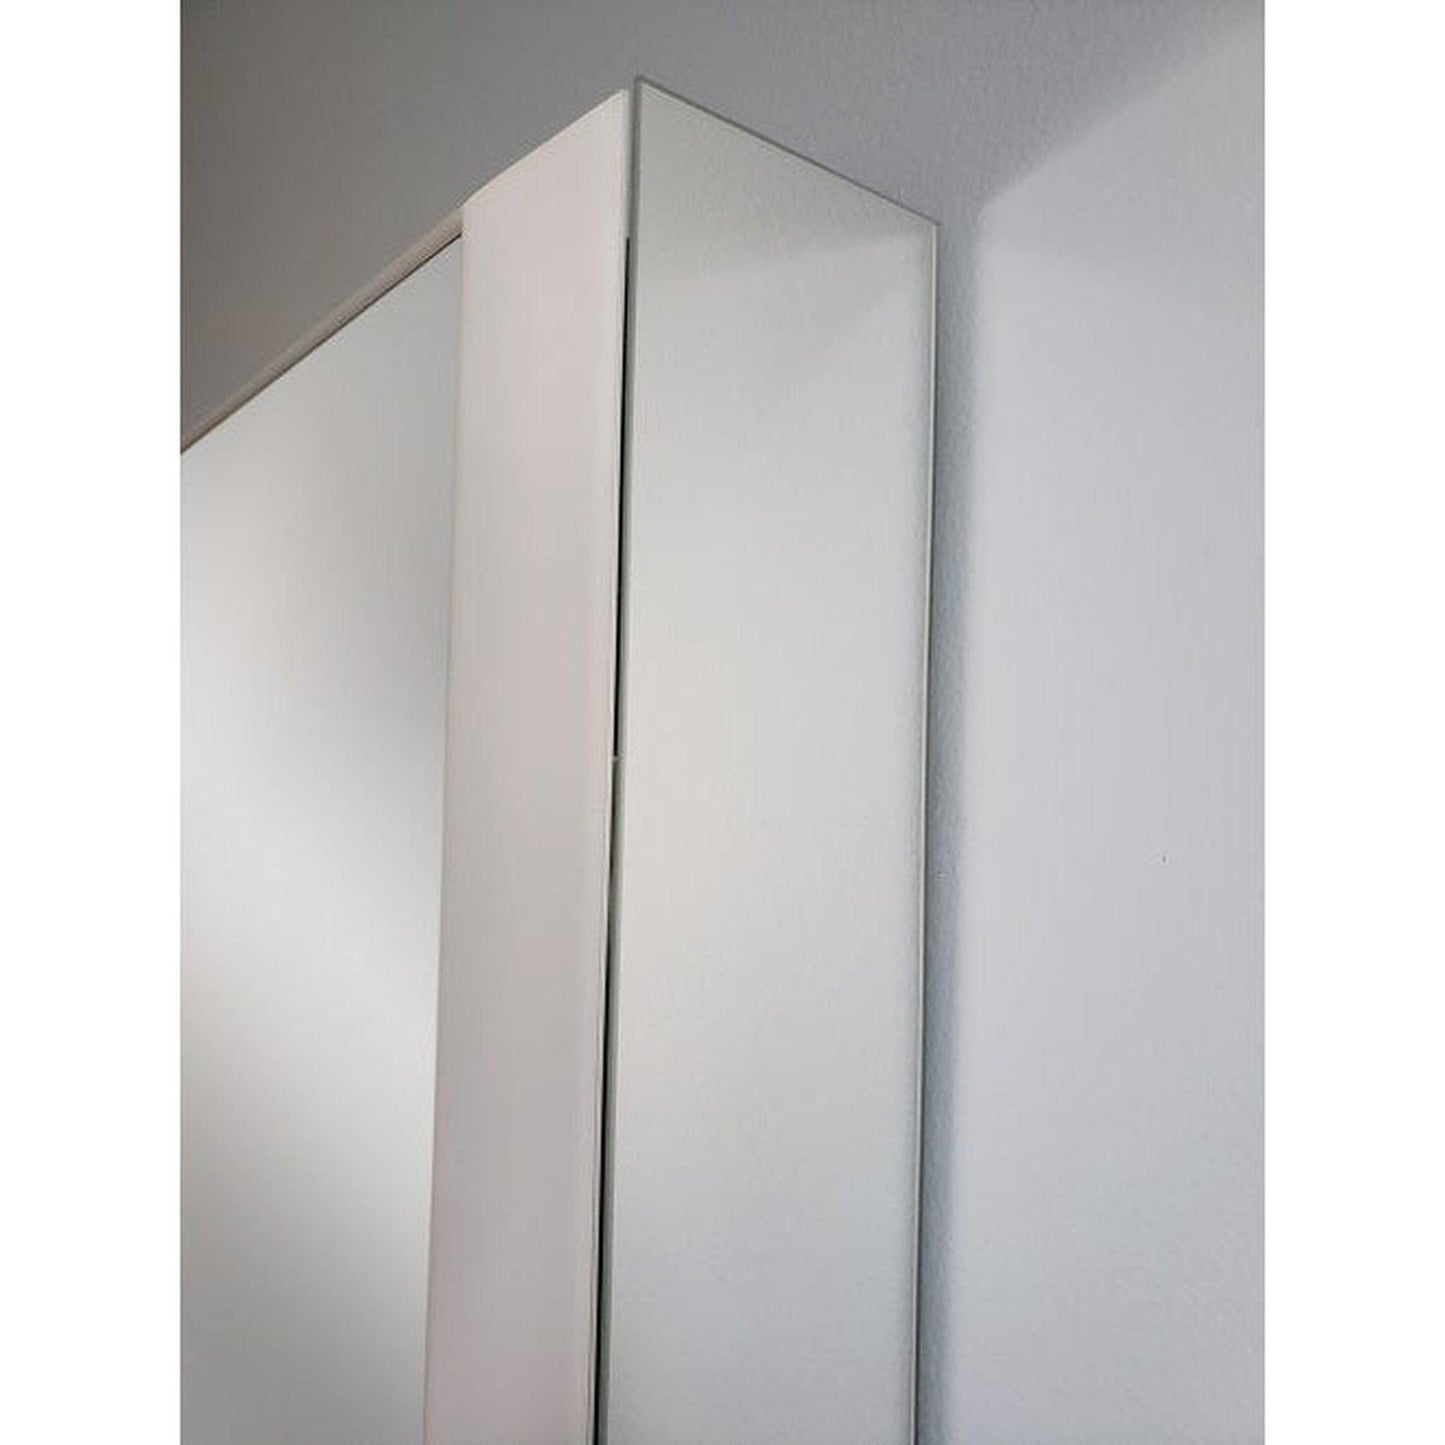 Sidler Quadro 59" x 36" 4000K 3 Mirror Doors Anodized Aluminum Medicine Cabinet With Night Light Function, Built-in GFCI Outlet and USB port